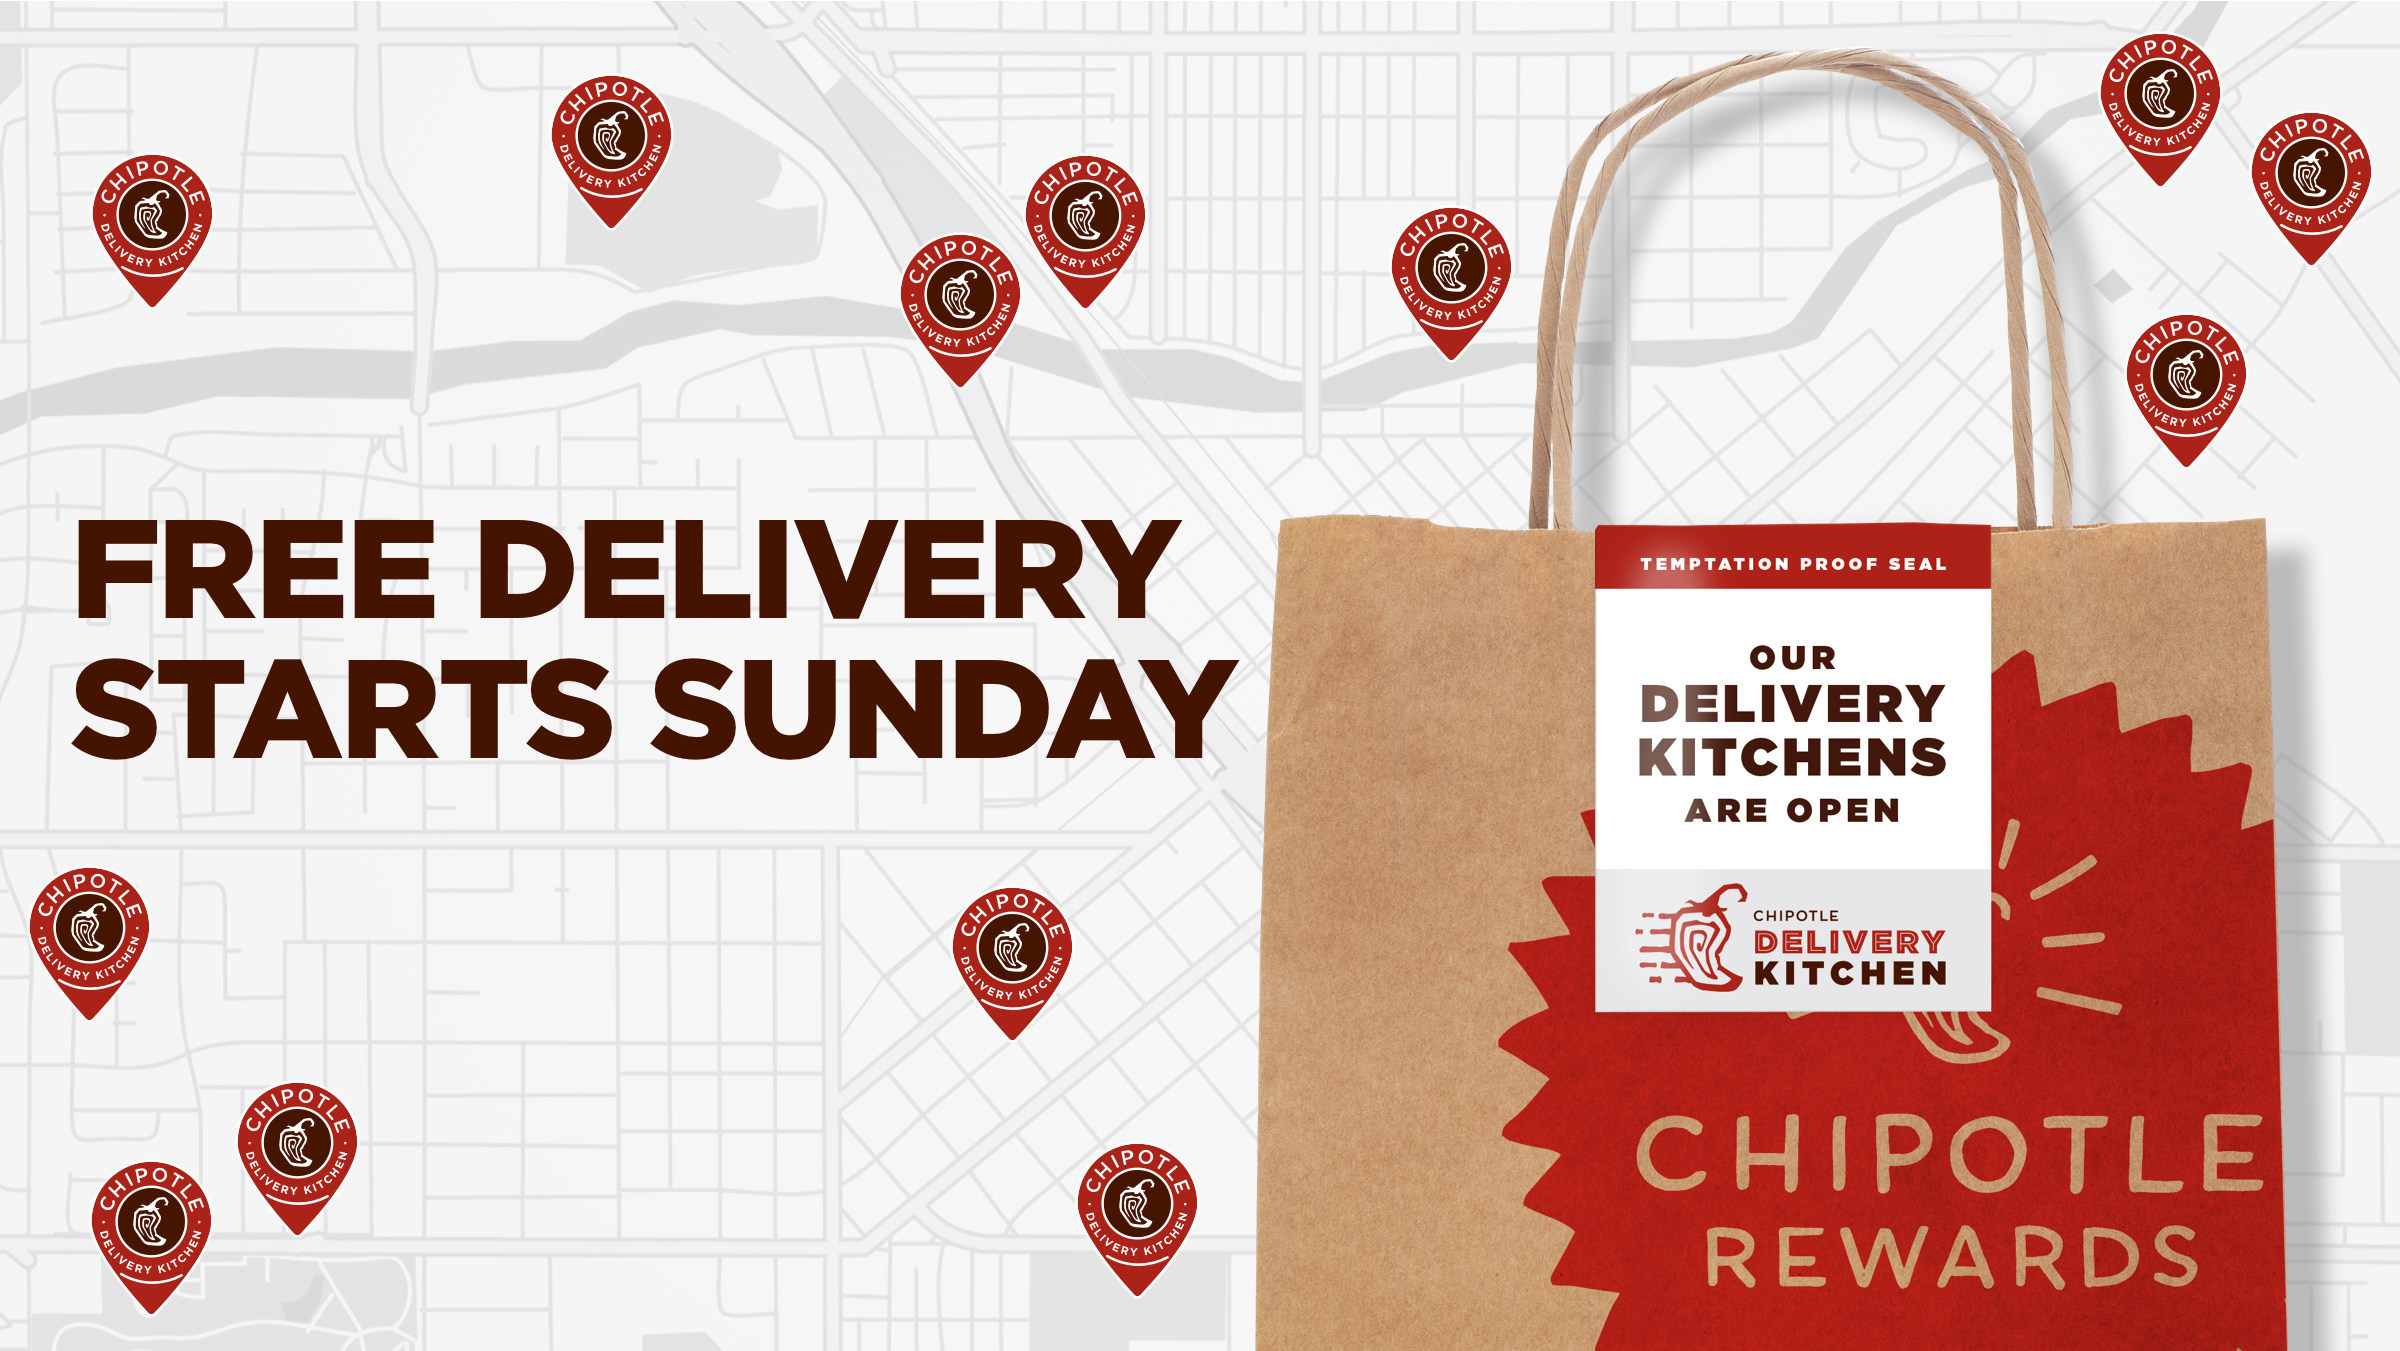 Chipotle Offers Free Delivery Through March Mar 12, 2020